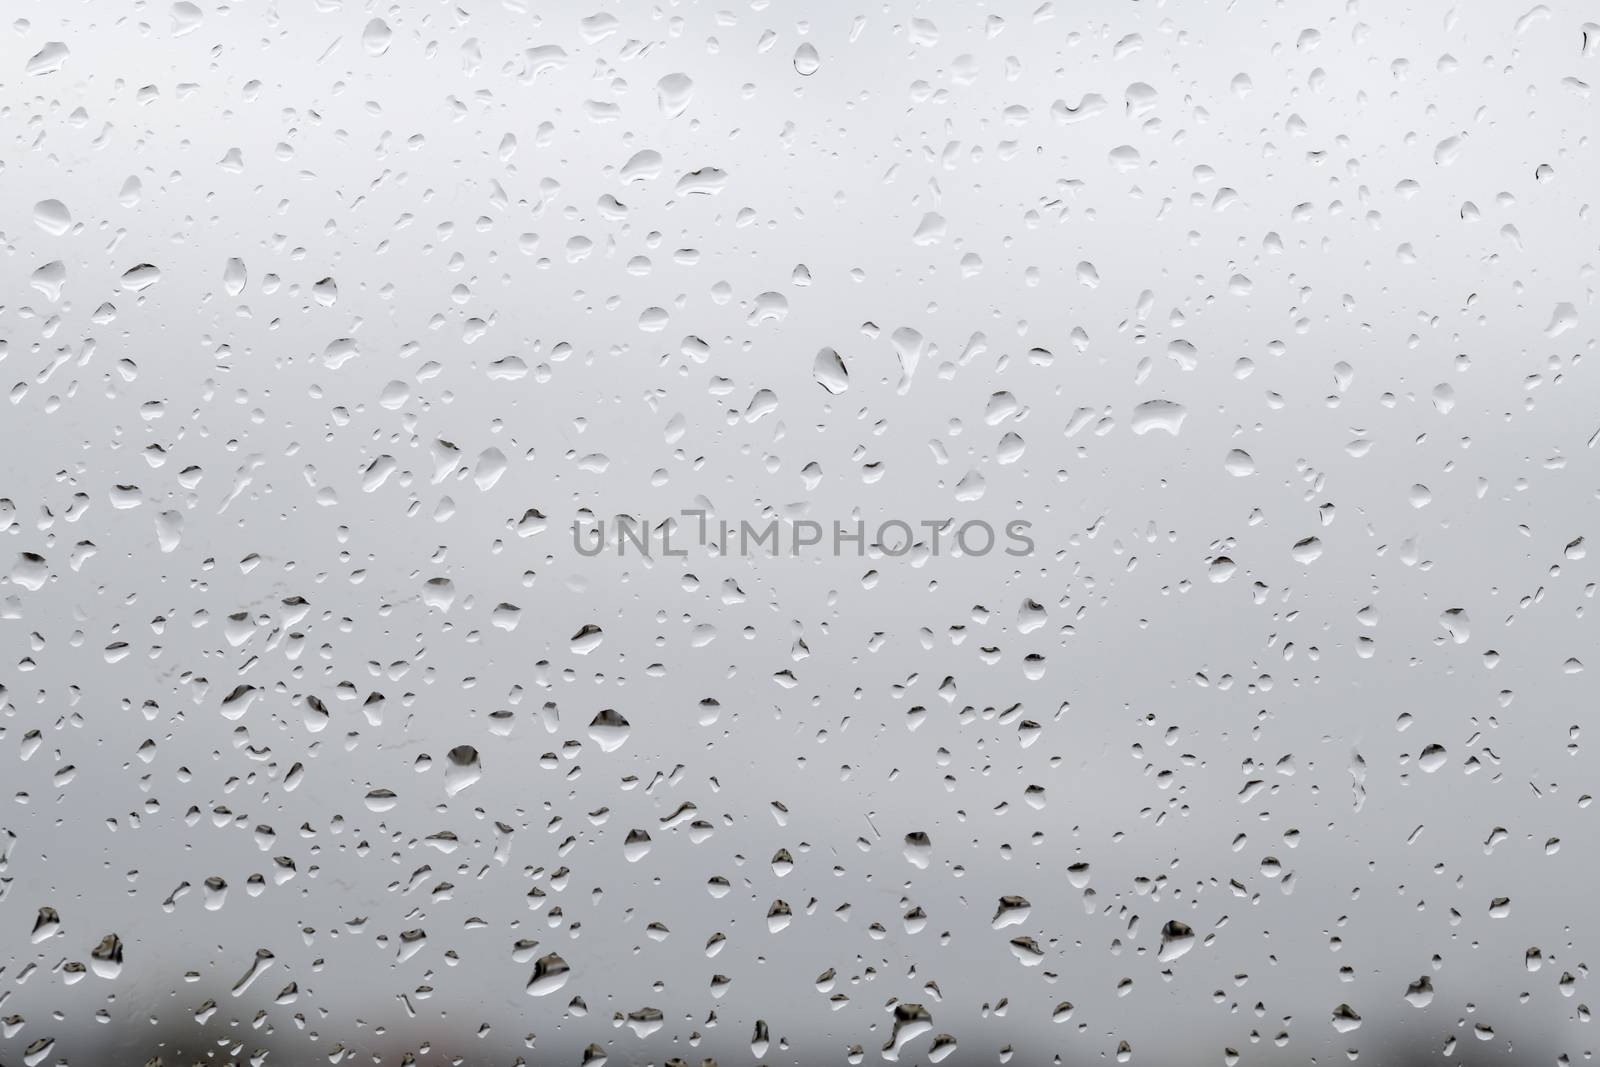 Raindrops at the raining day on the window glass agai by ankorlight